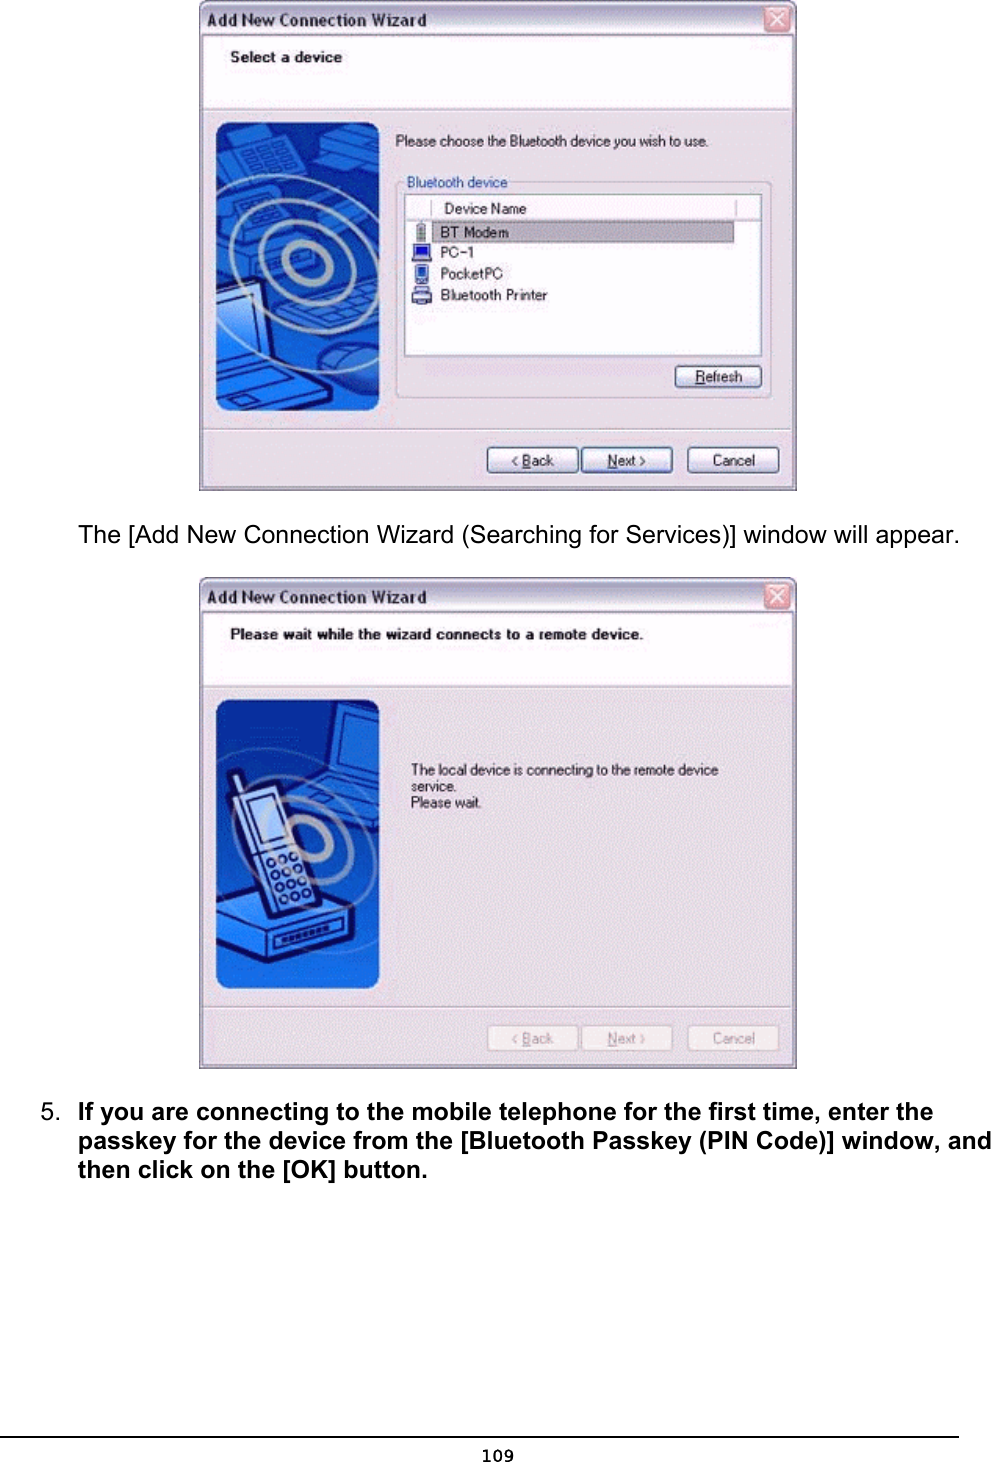      The [Add New Connection Wizard (Searching for Services)] window will appear.  5.  If you are connecting to the mobile telephone for the first time, enter the passkey for the device from the [Bluetooth Passkey (PIN Code)] window, and then click on the [OK] button.  109